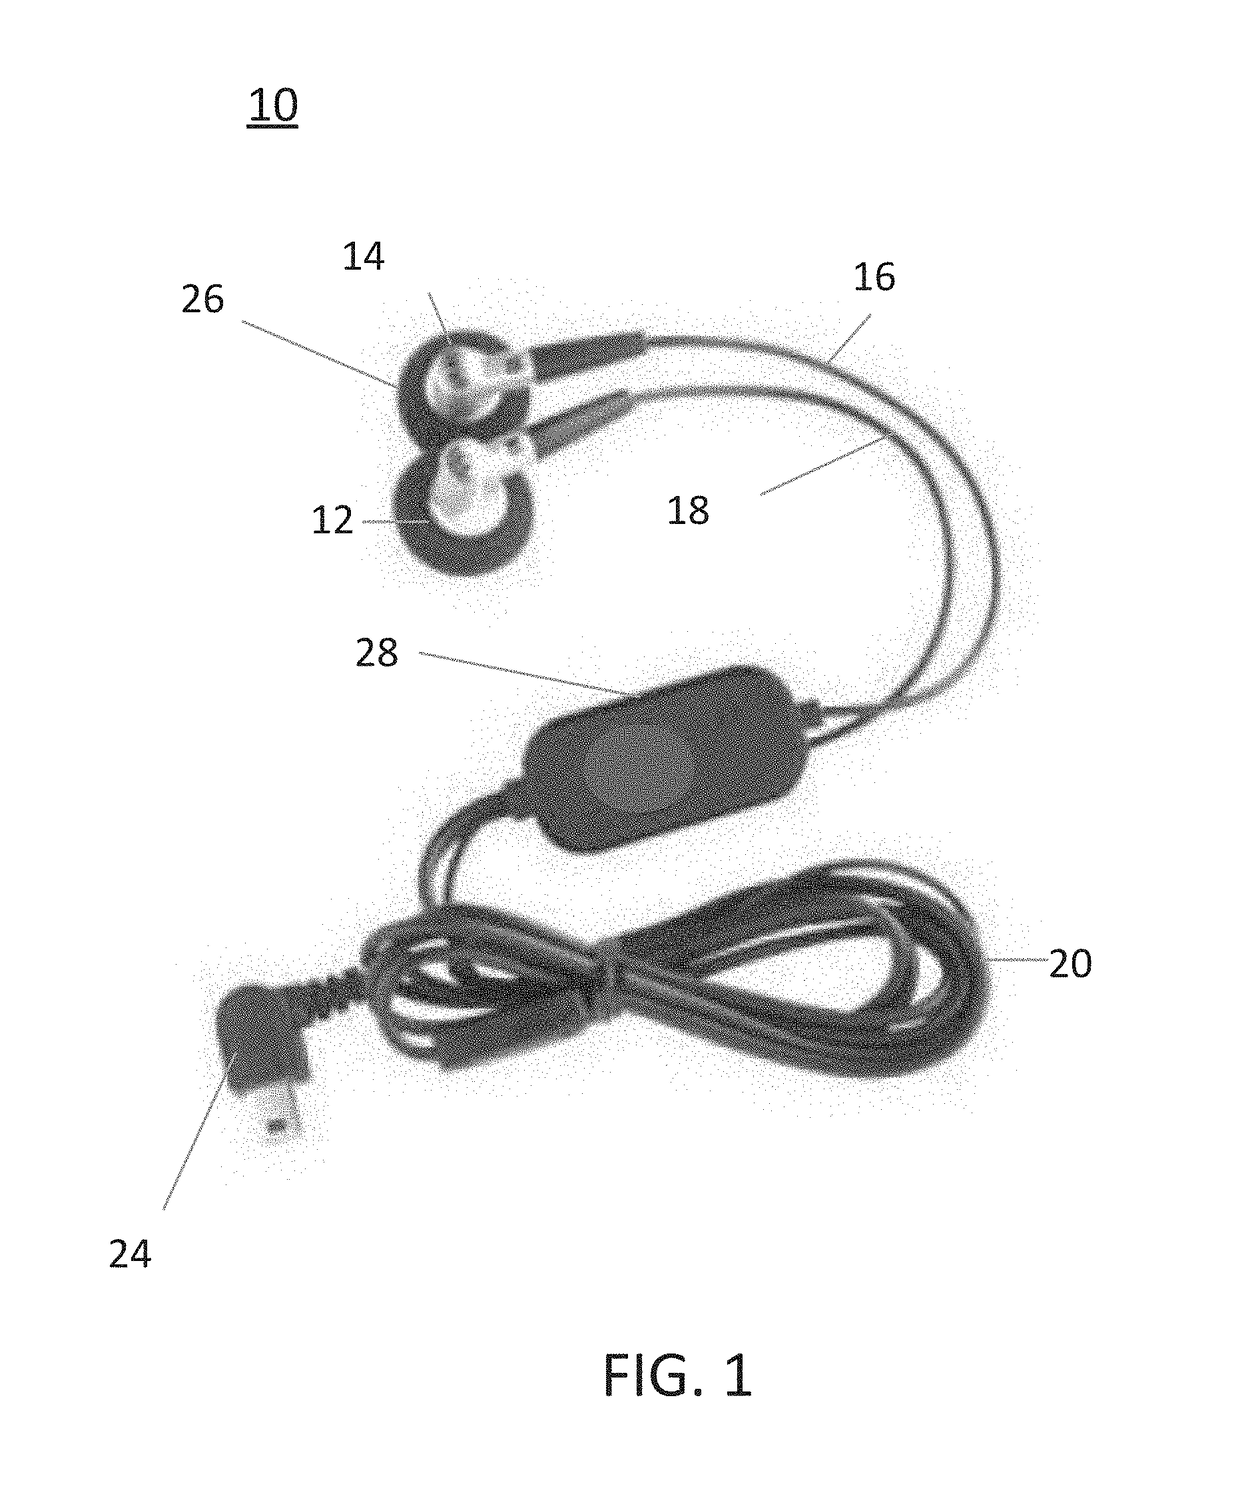 Wired audio headset with physiological monitoring